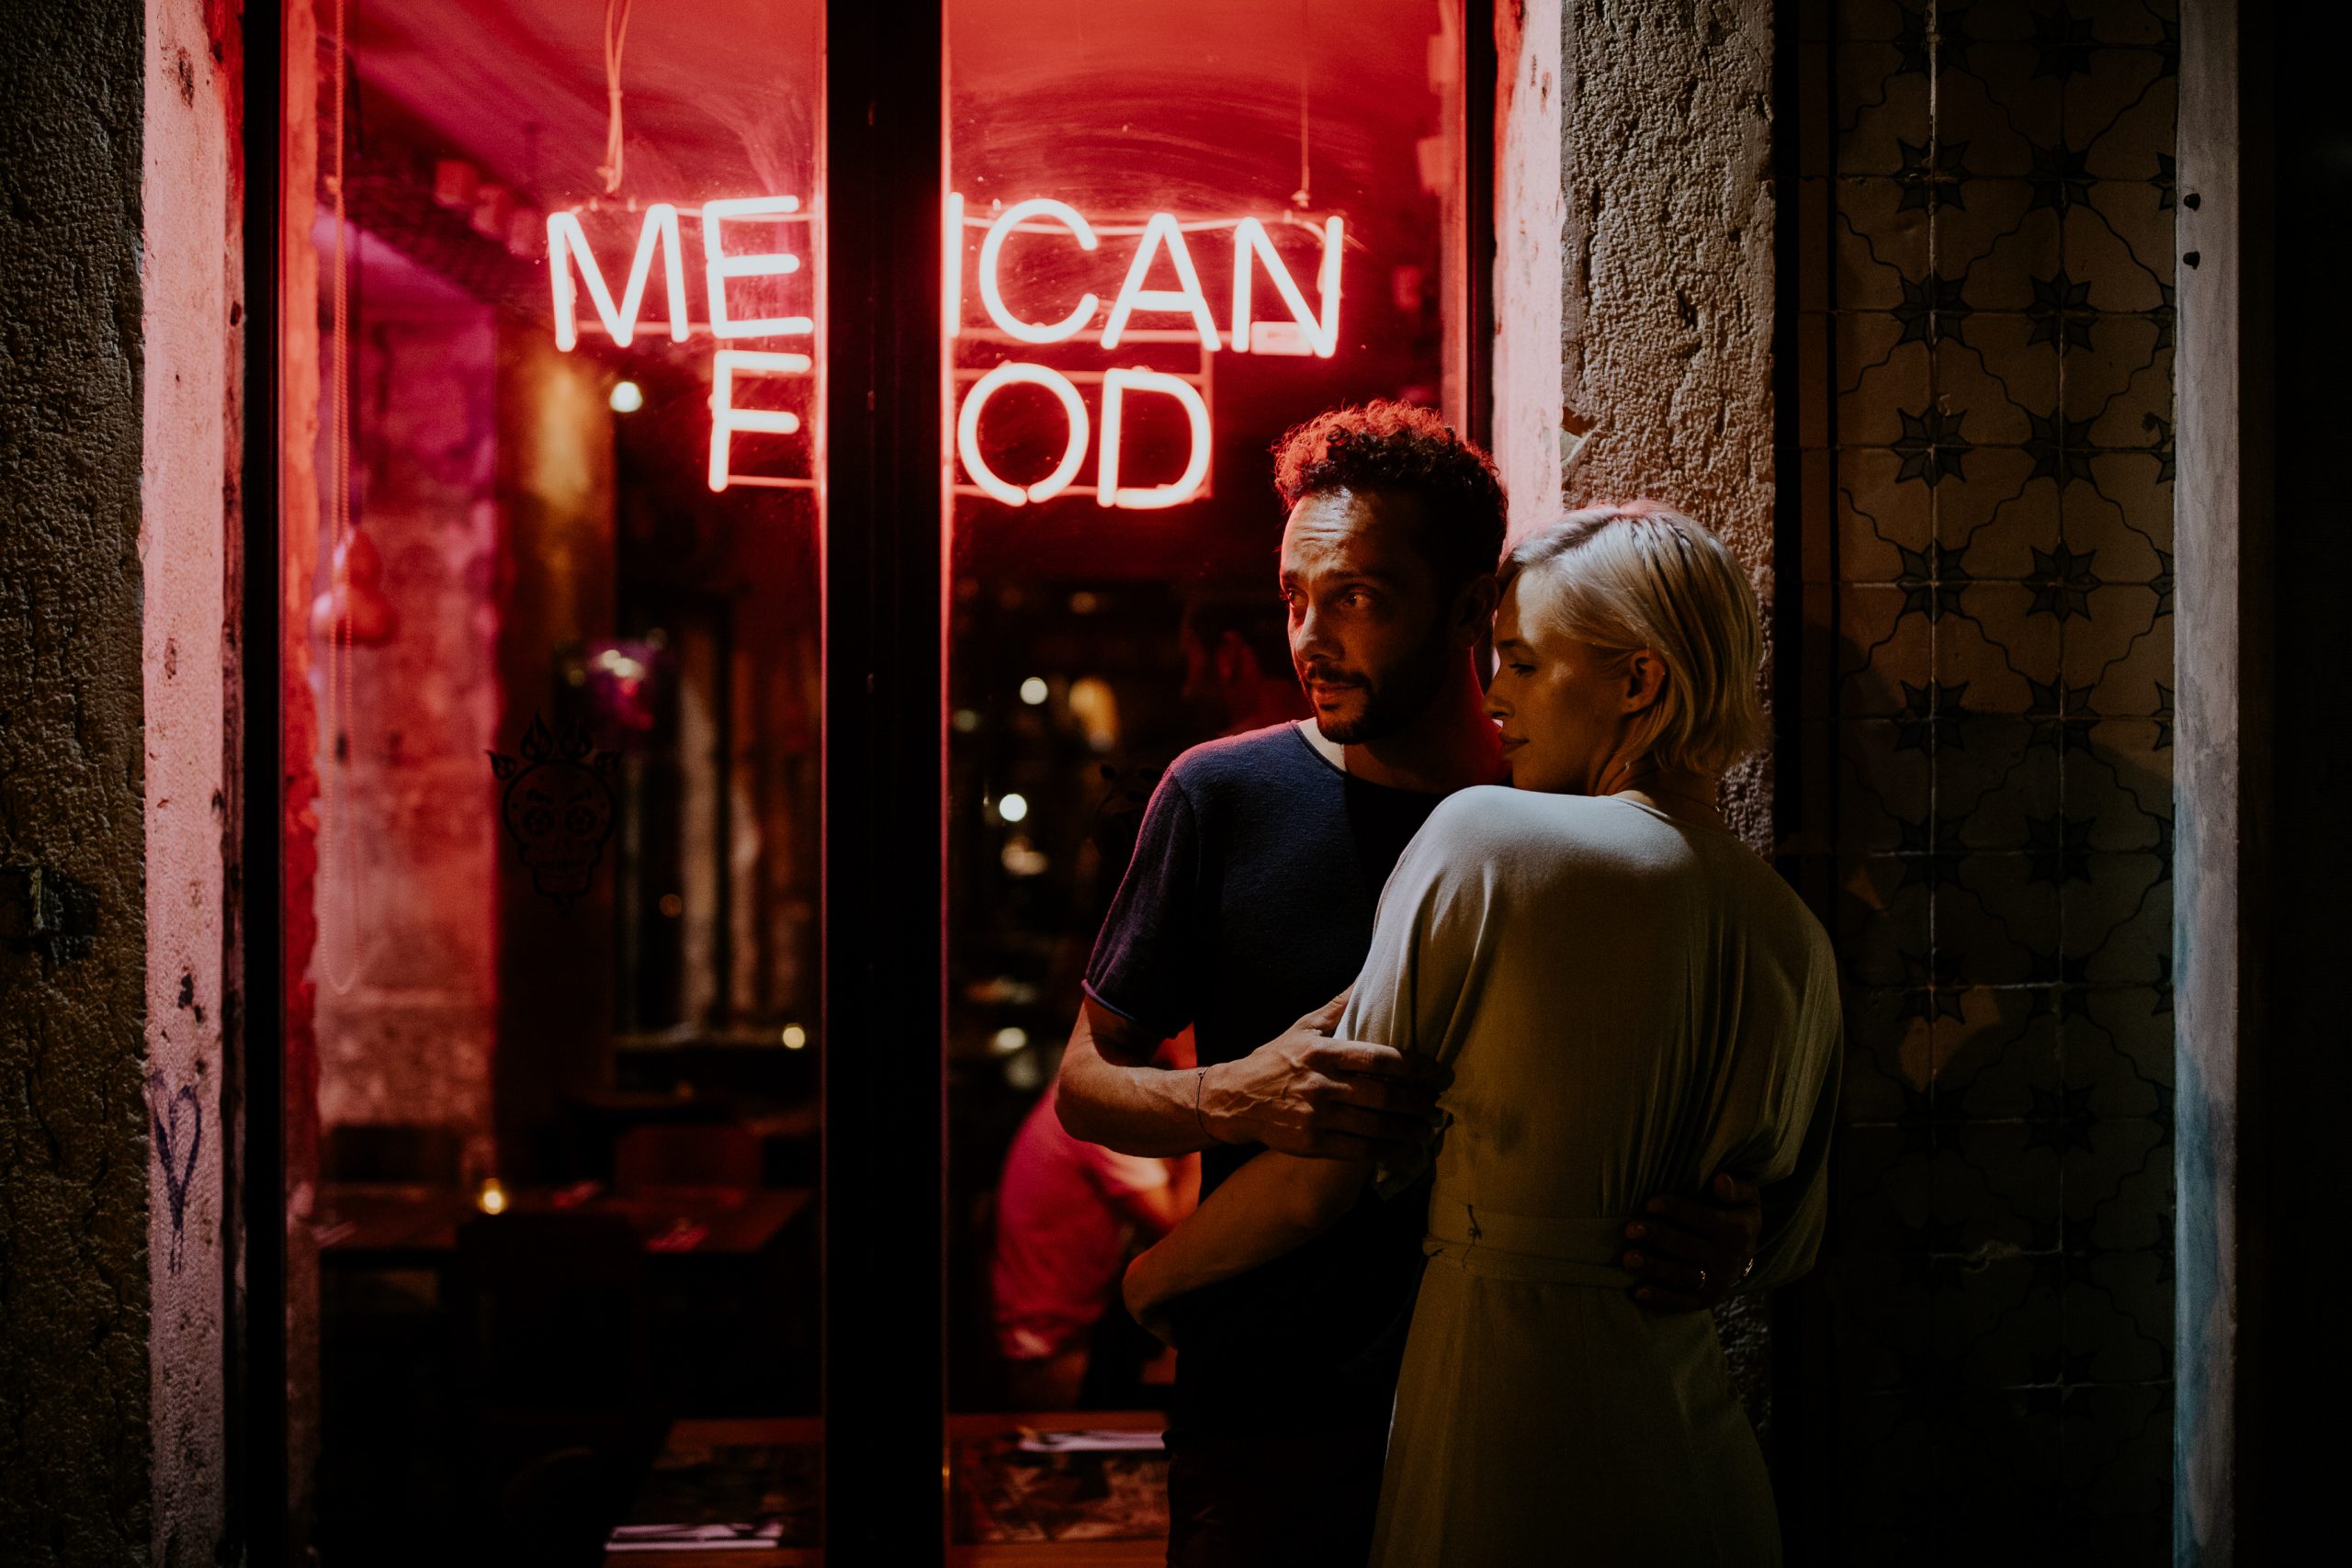 couple embracing at night next to a mexican food restaurant with red neons